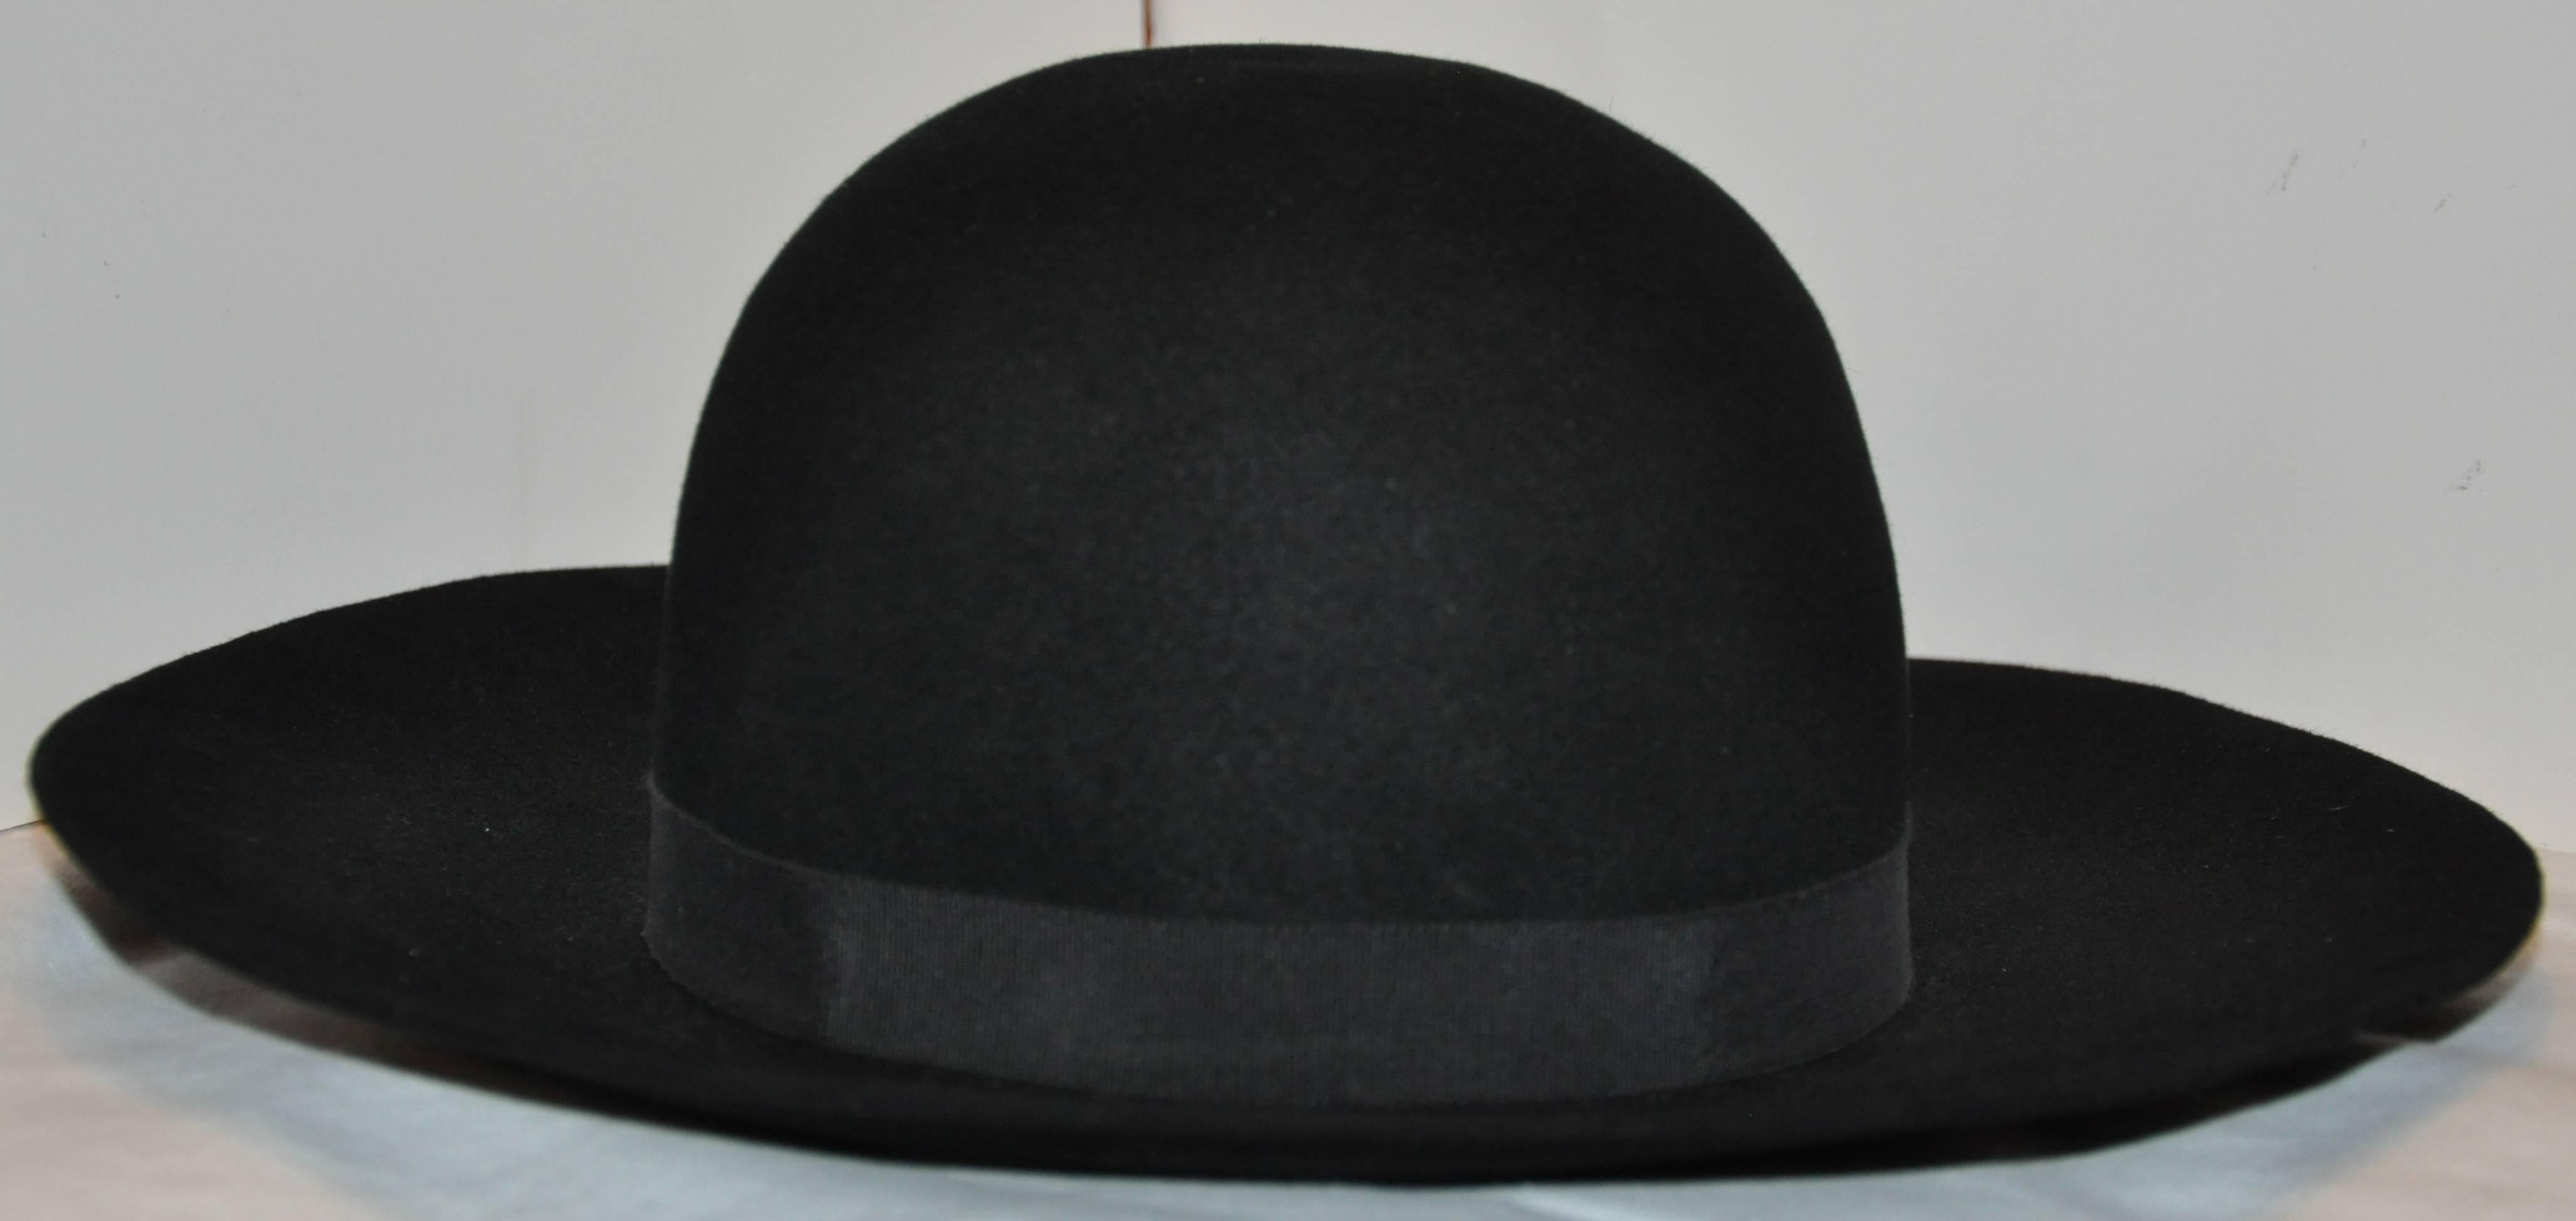        Yves Saint Laurent wonderfully elegant and classic black wool felt wide brim hat measures 6 inches in height. The interior circumference measures 22 inches, exterior wide brim circumference measures 45 inches, made in France.